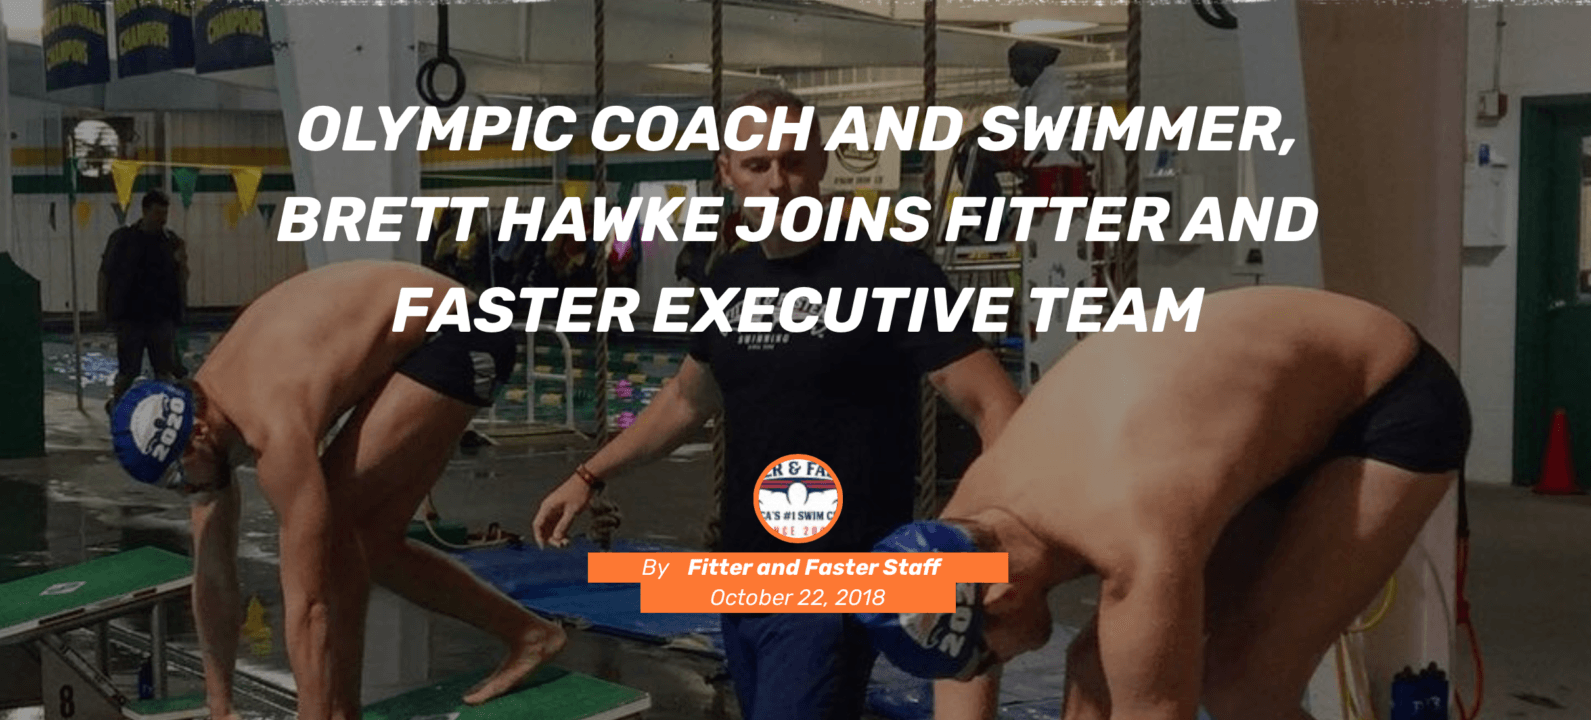 Olympic Coach and Swimmer, Brett Hawke Joins Fitter and Faster Executive Team